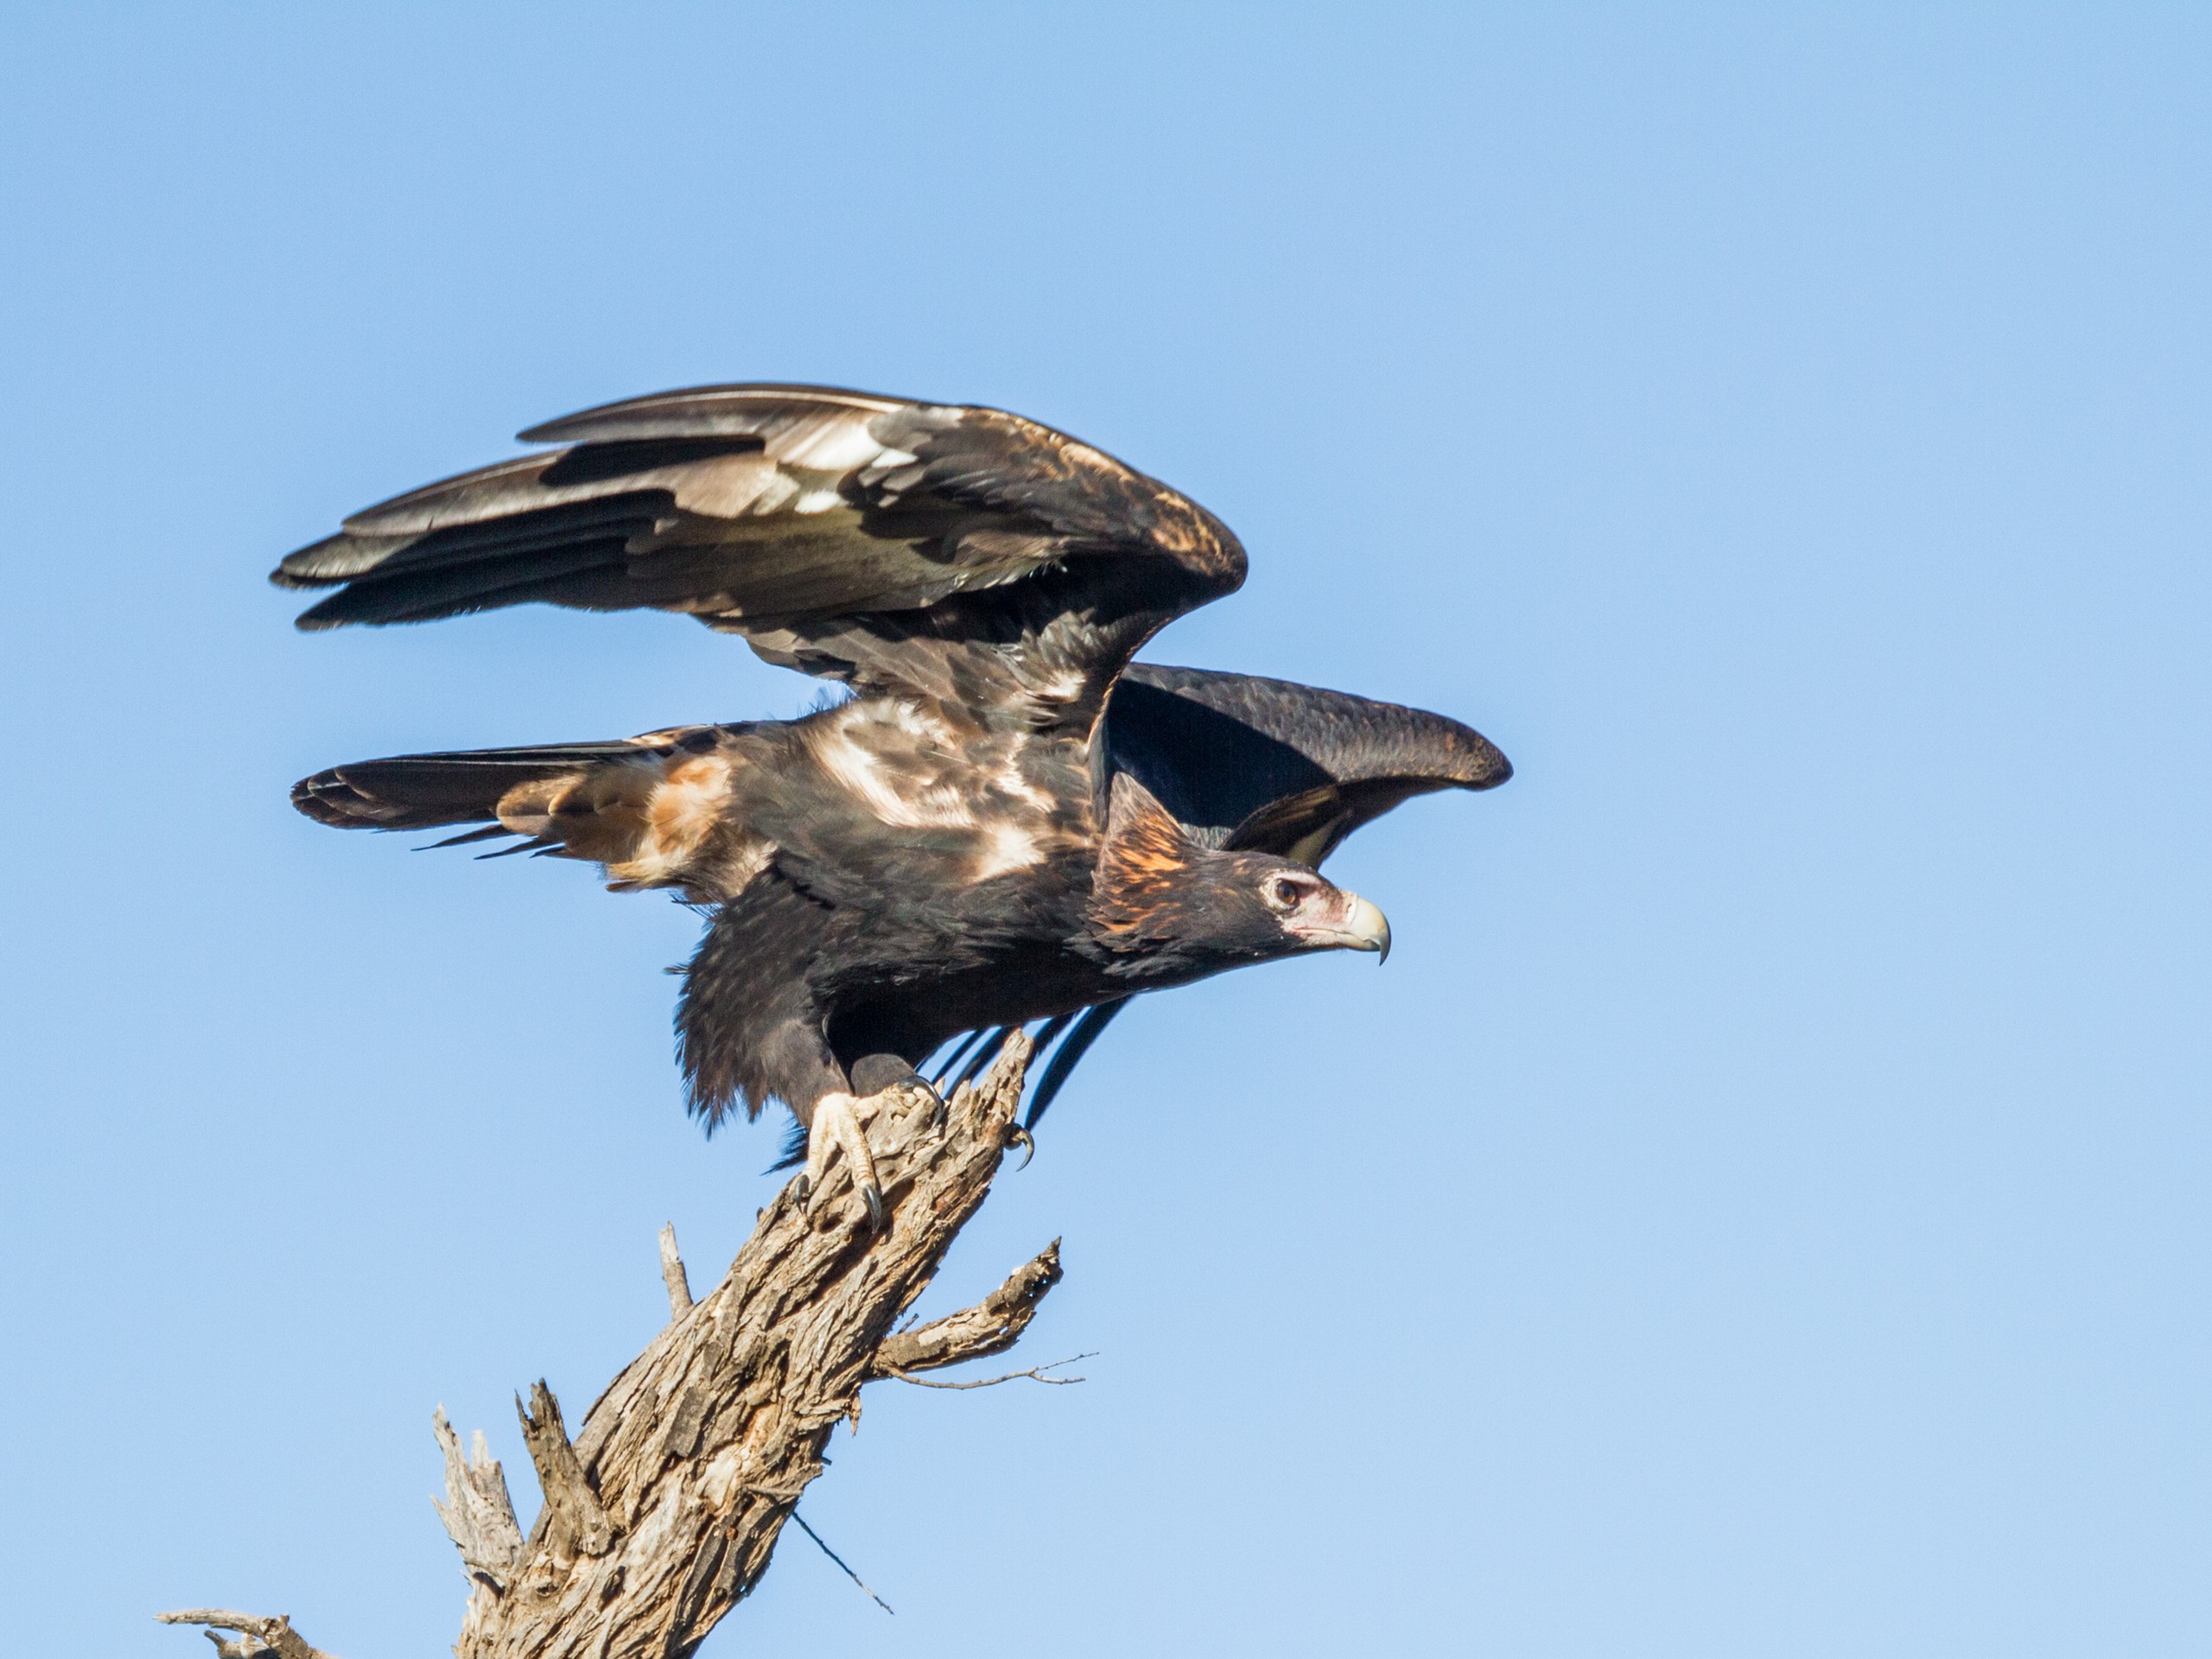 Wedge-Tailed Eagle seen while on a guided tour in Australia